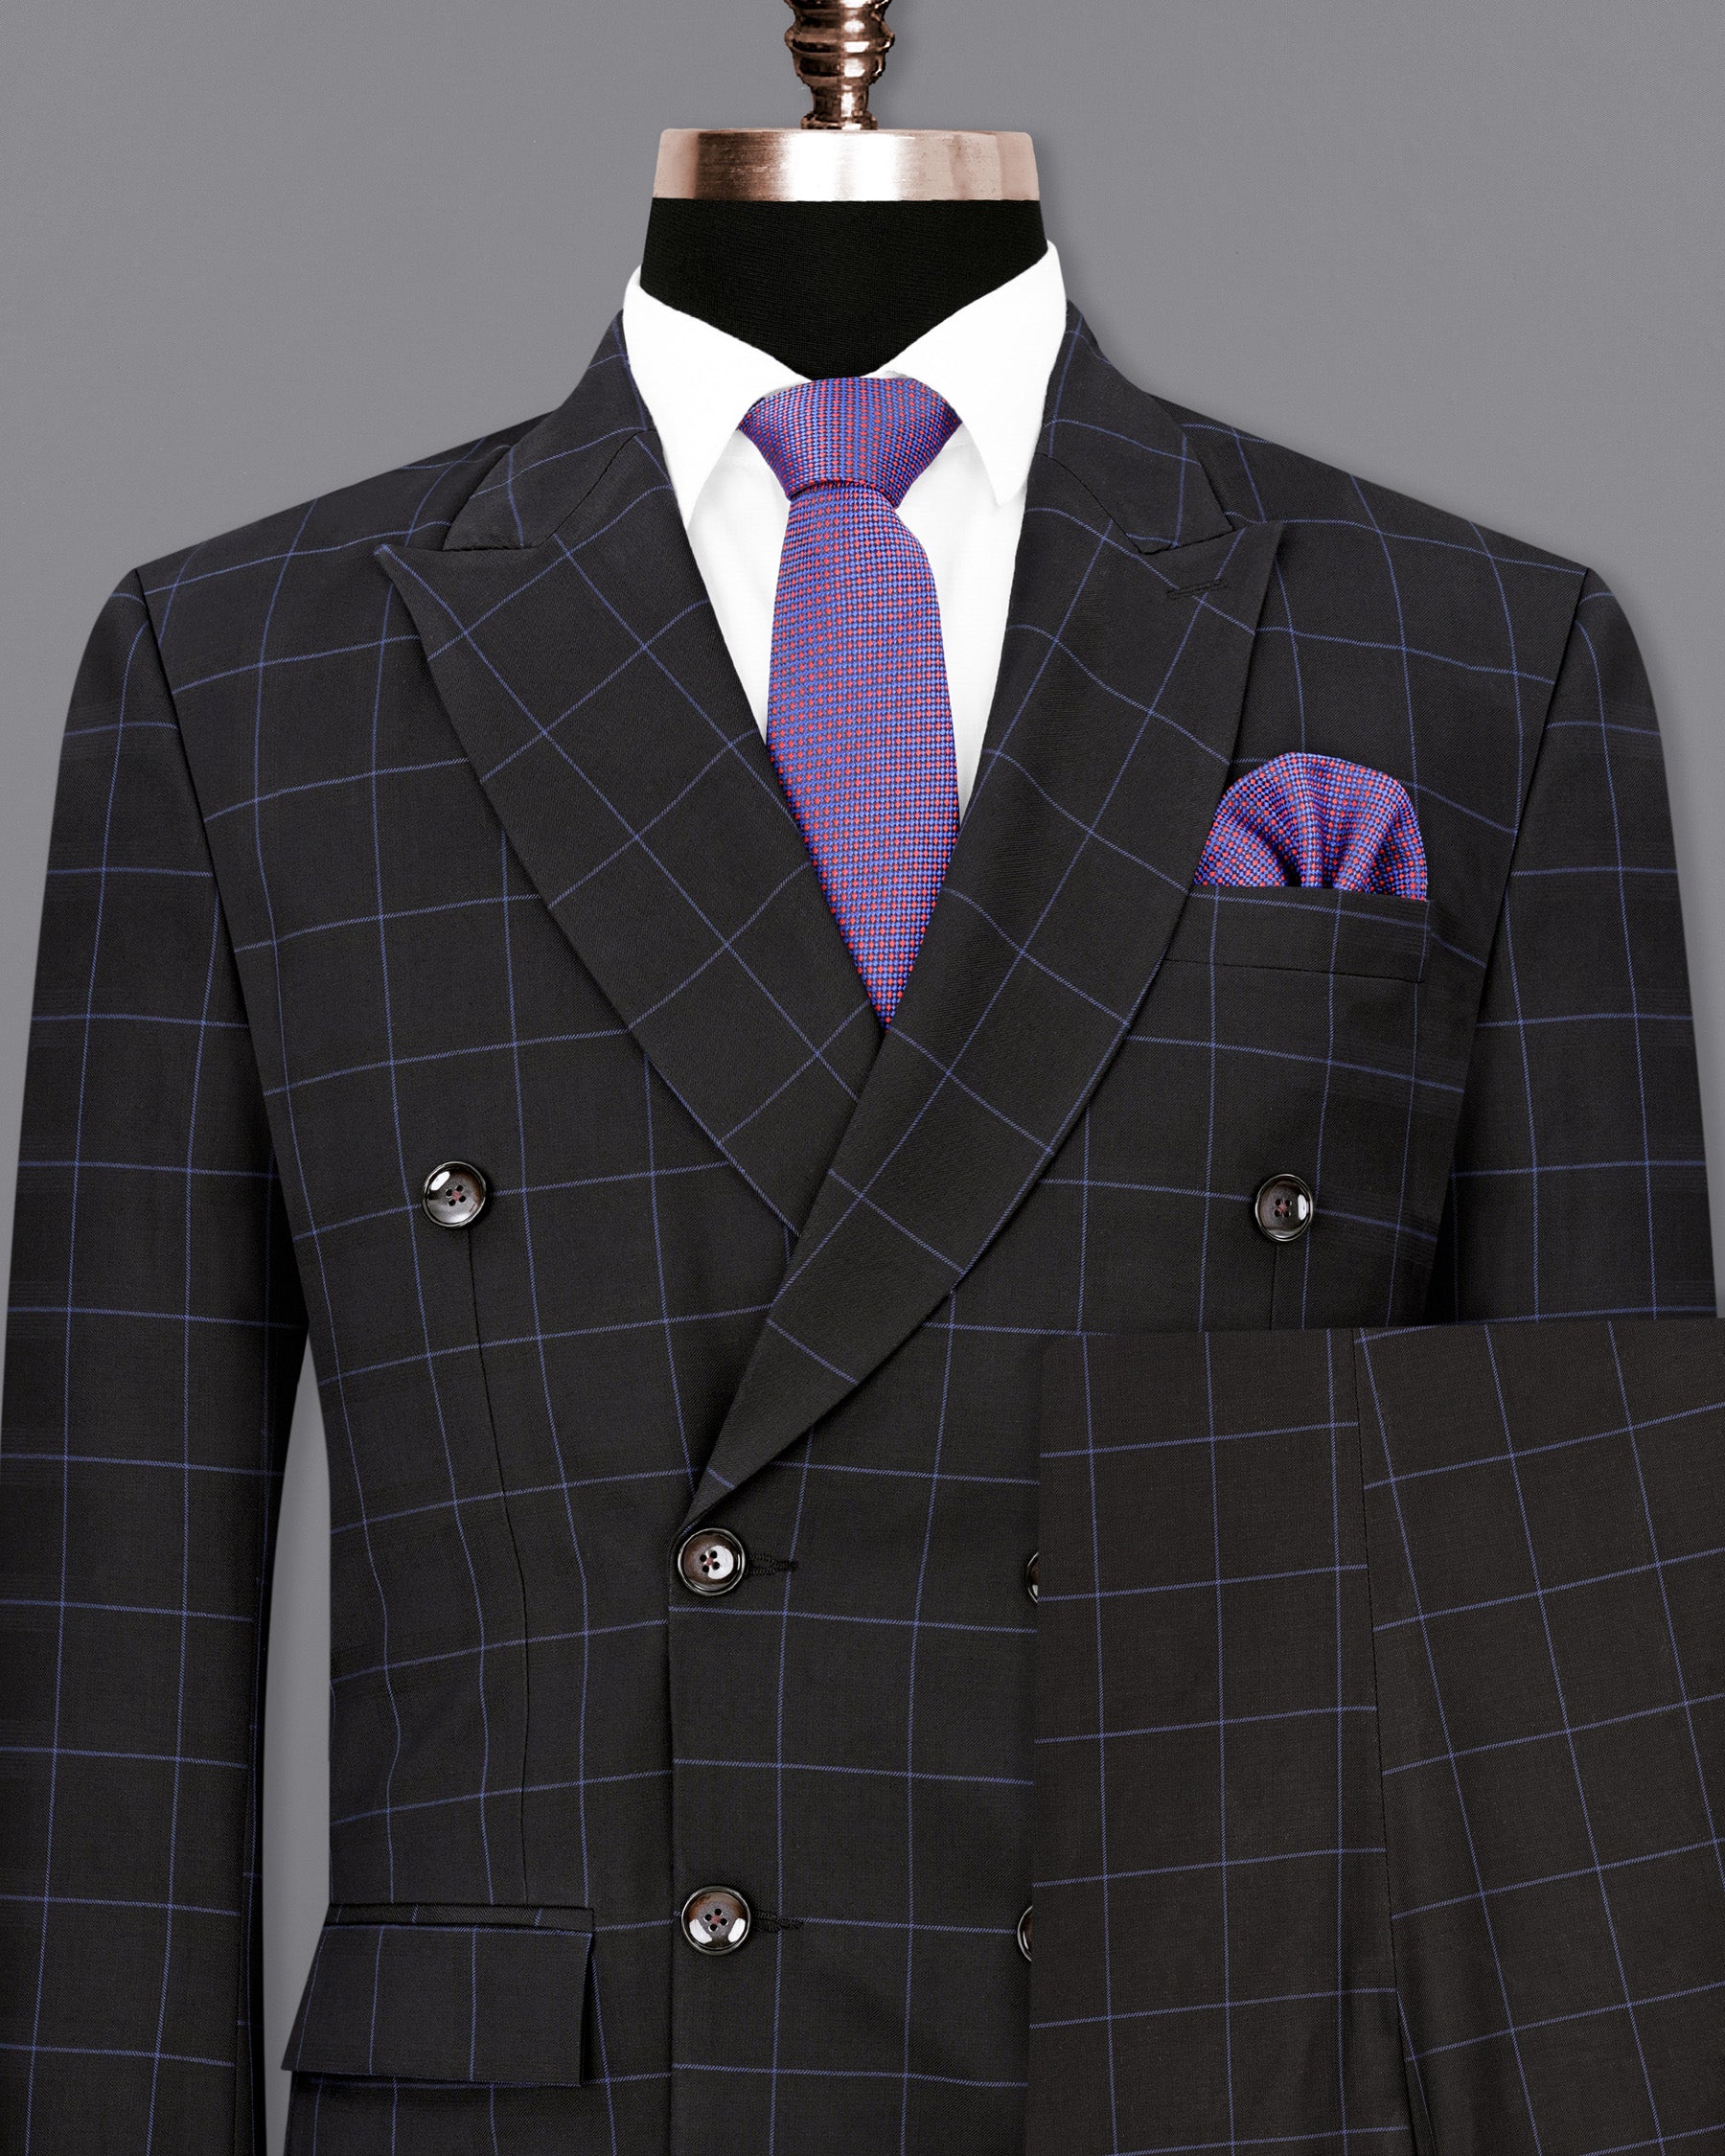 Thunder Windowpane Double Breasted Suit ST1891-DB-36, ST1891-DB-38, ST1891-DB-40, ST1891-DB-42, ST1891-DB-44, ST1891-DB-46, ST1891-DB-48, ST1891-DB-50, ST1891-DB-52, ST1891-DB-54, ST1891-DB-56, ST1891-DB-58, ST1891-DB-60